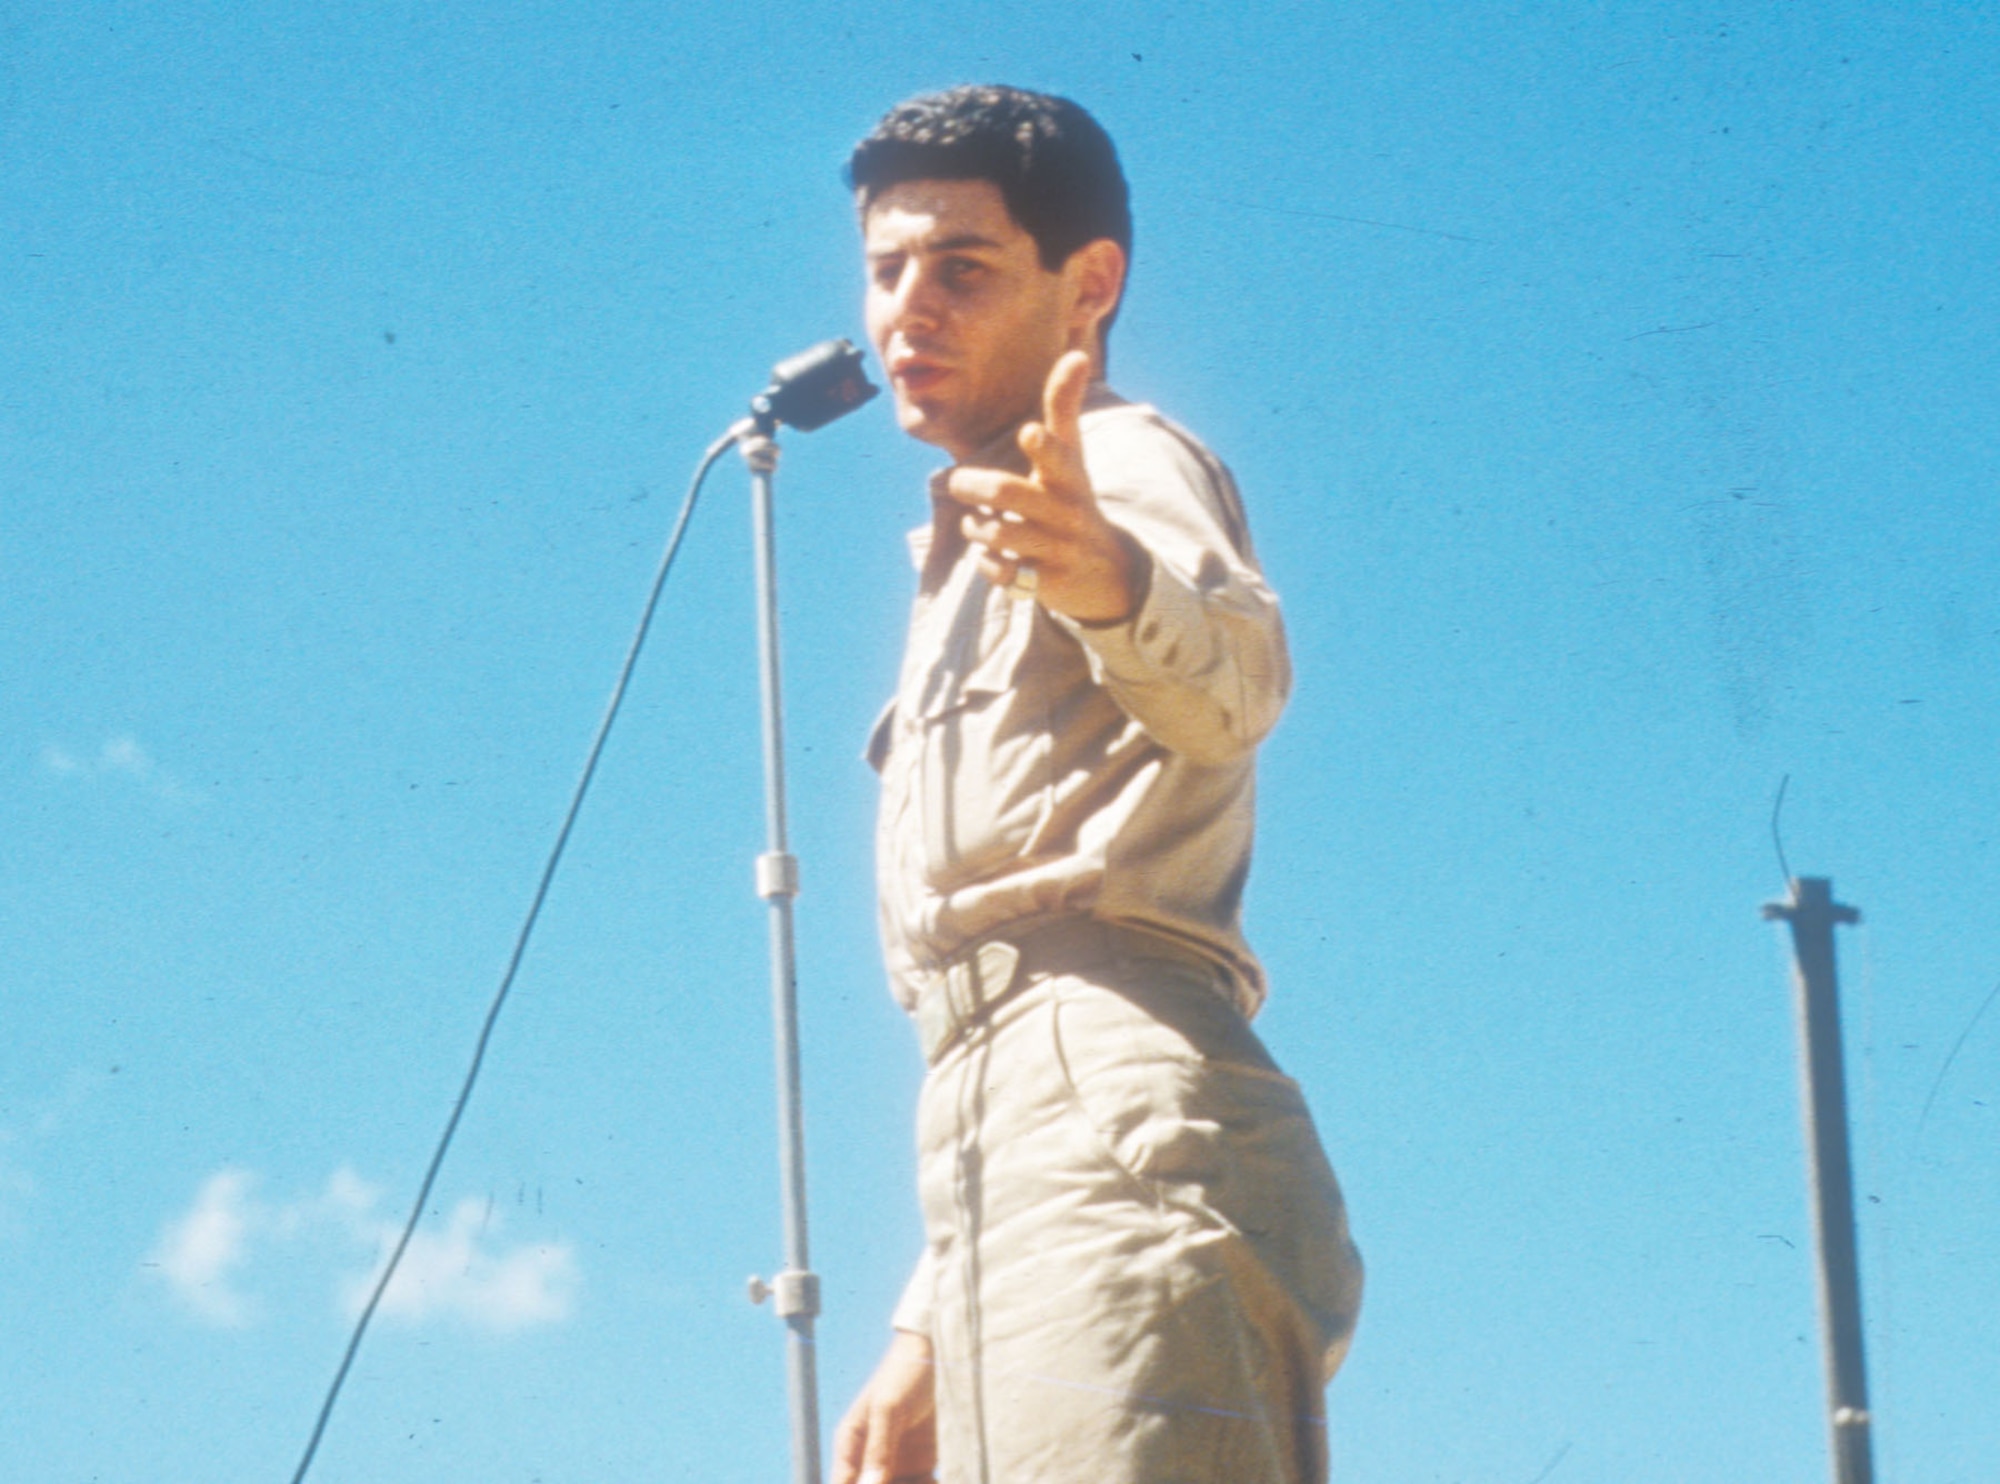 Famed entertainer Eddie Fisher performs in a USO show at K-9 (Pusan East) in August 1952. (U.S. Air Force photo)